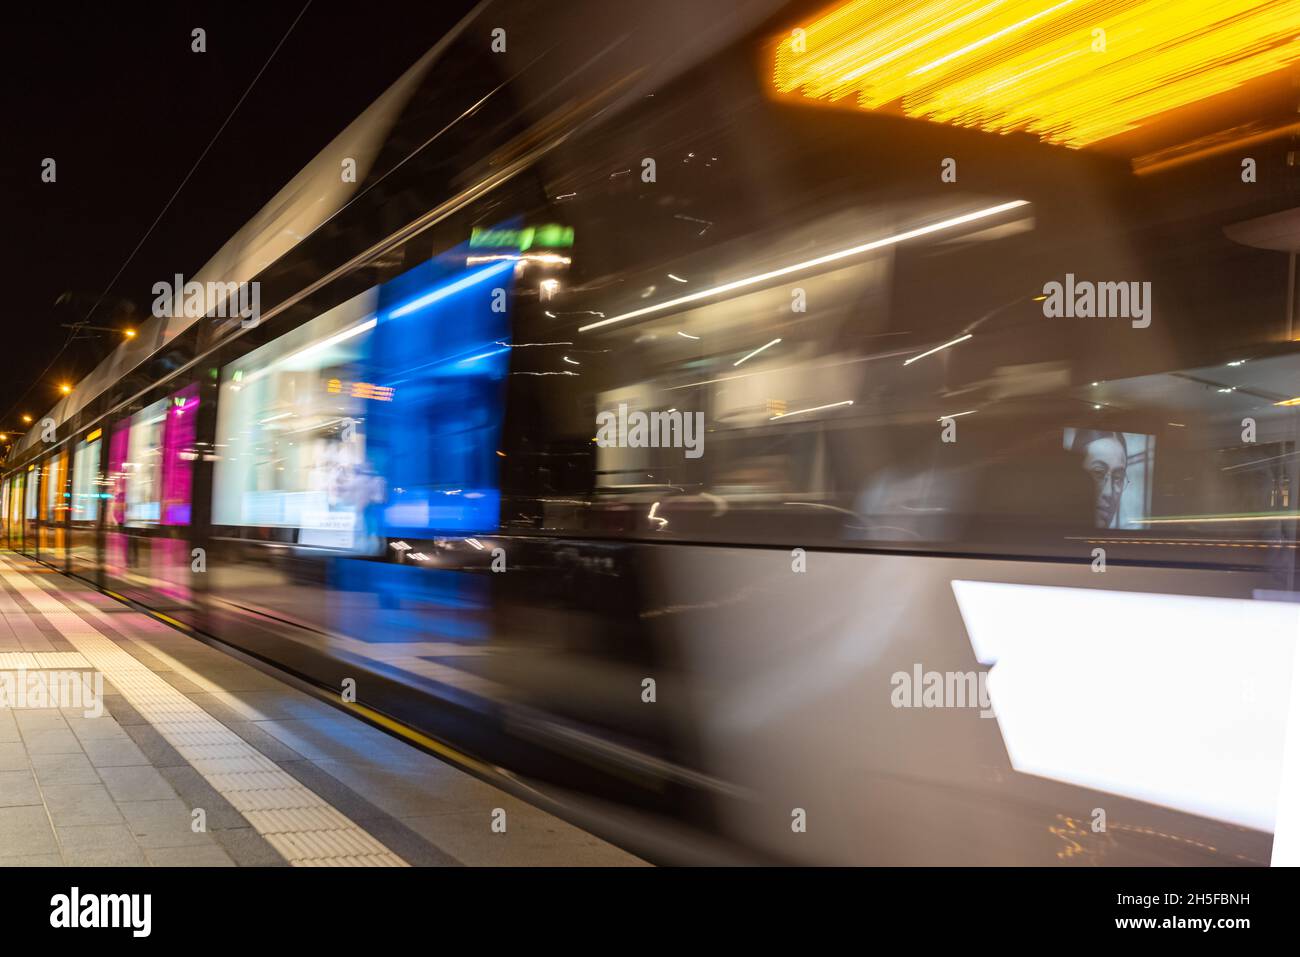 blurred public transport tram in Luxembourg city going to the central train station (Gare centrale) Stock Photo